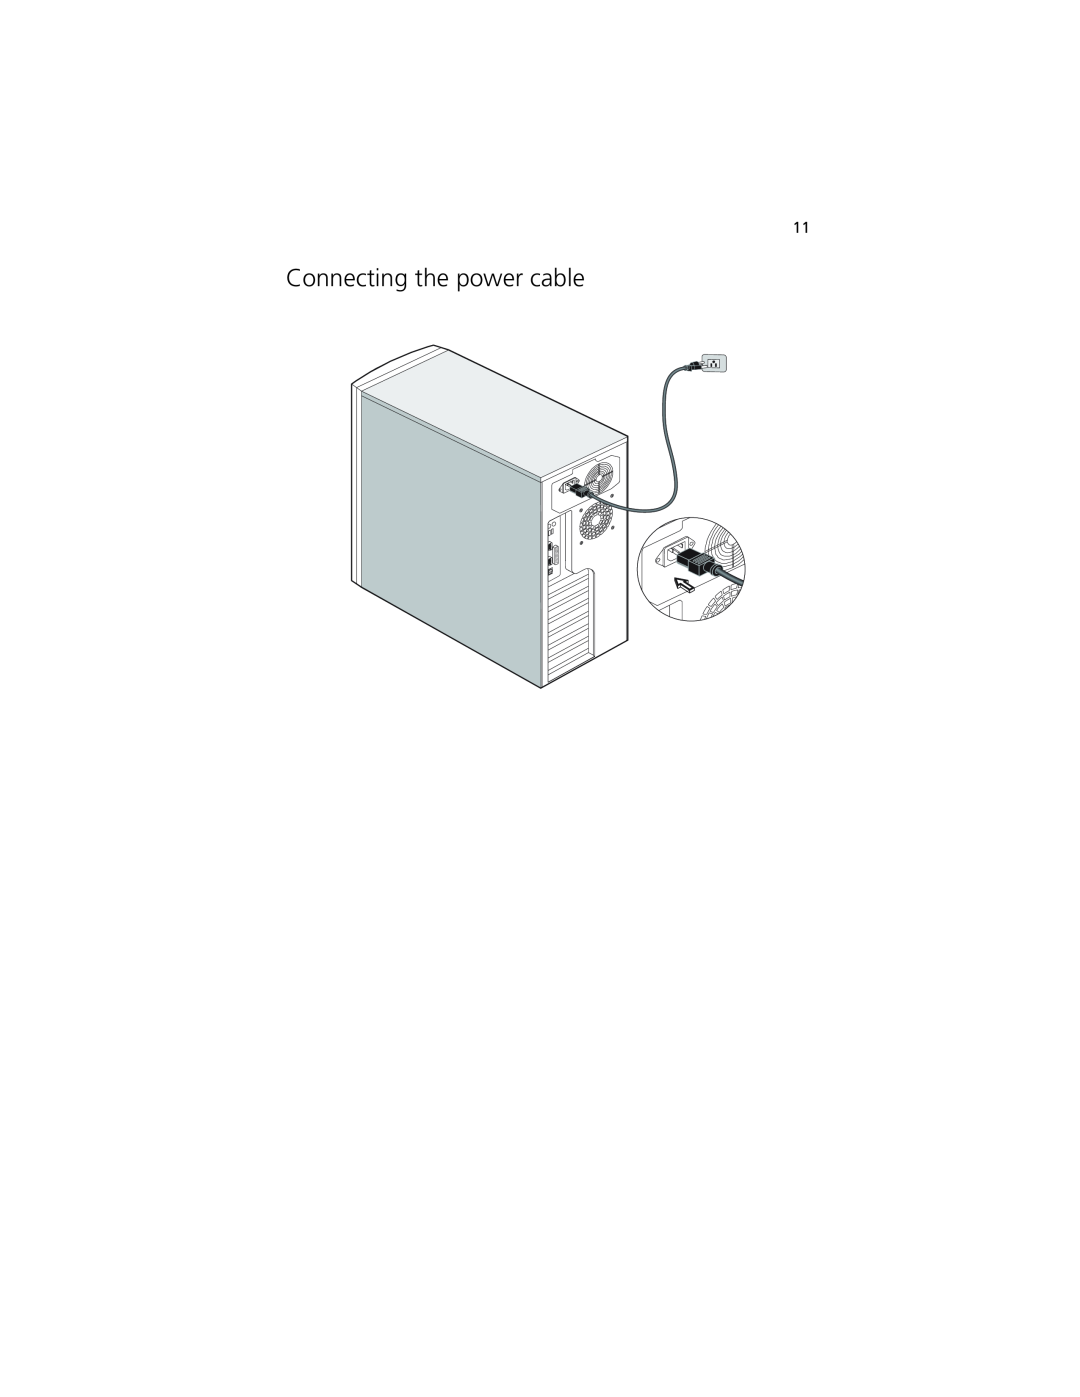 Acer G301 manual Connecting the power cable 